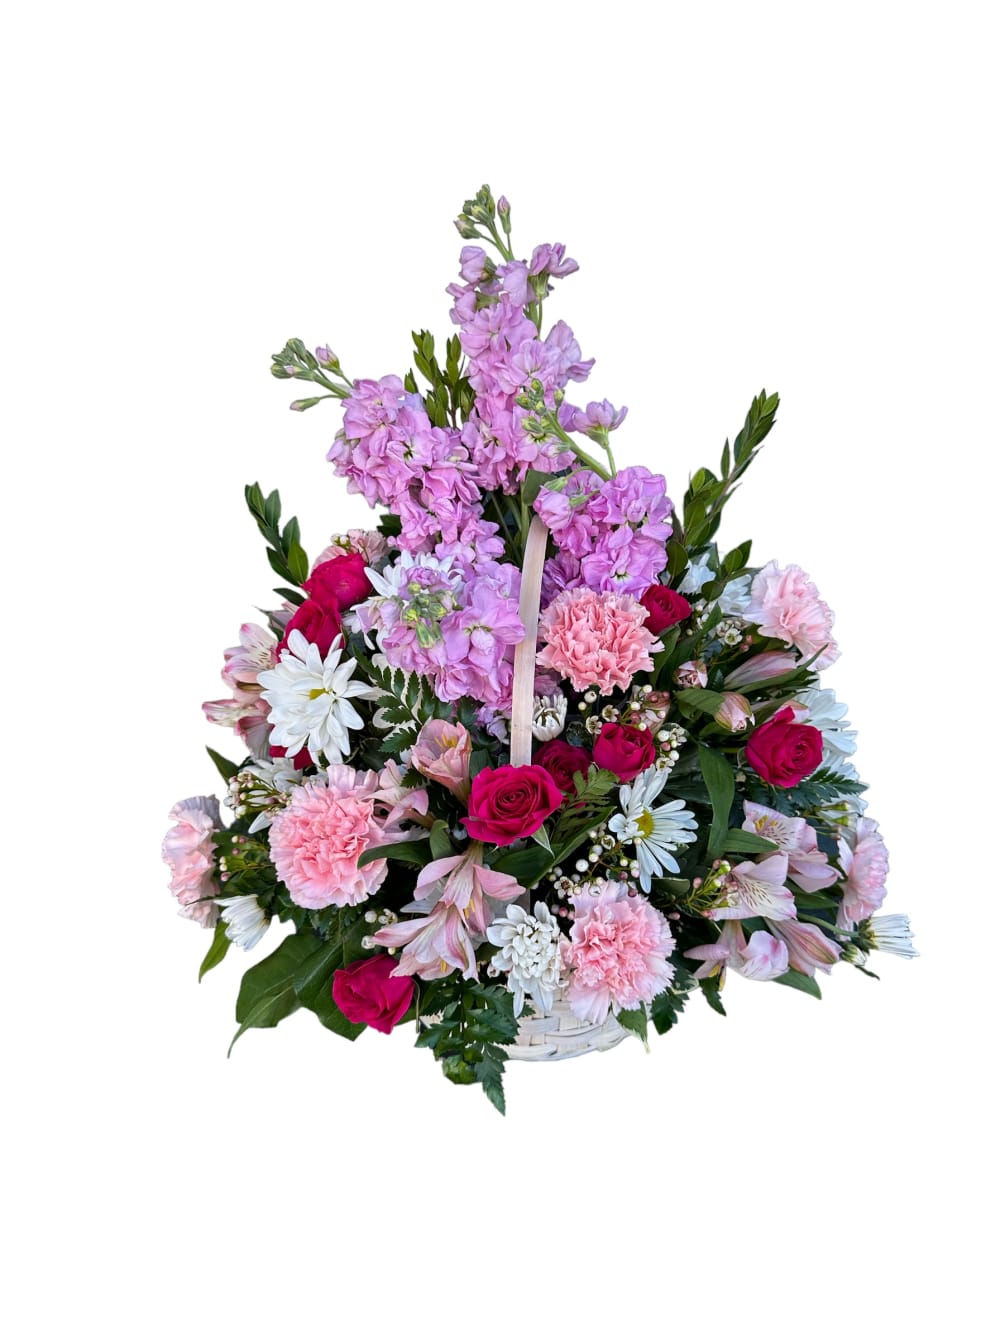 selected colorful mix of flowers in a white basket